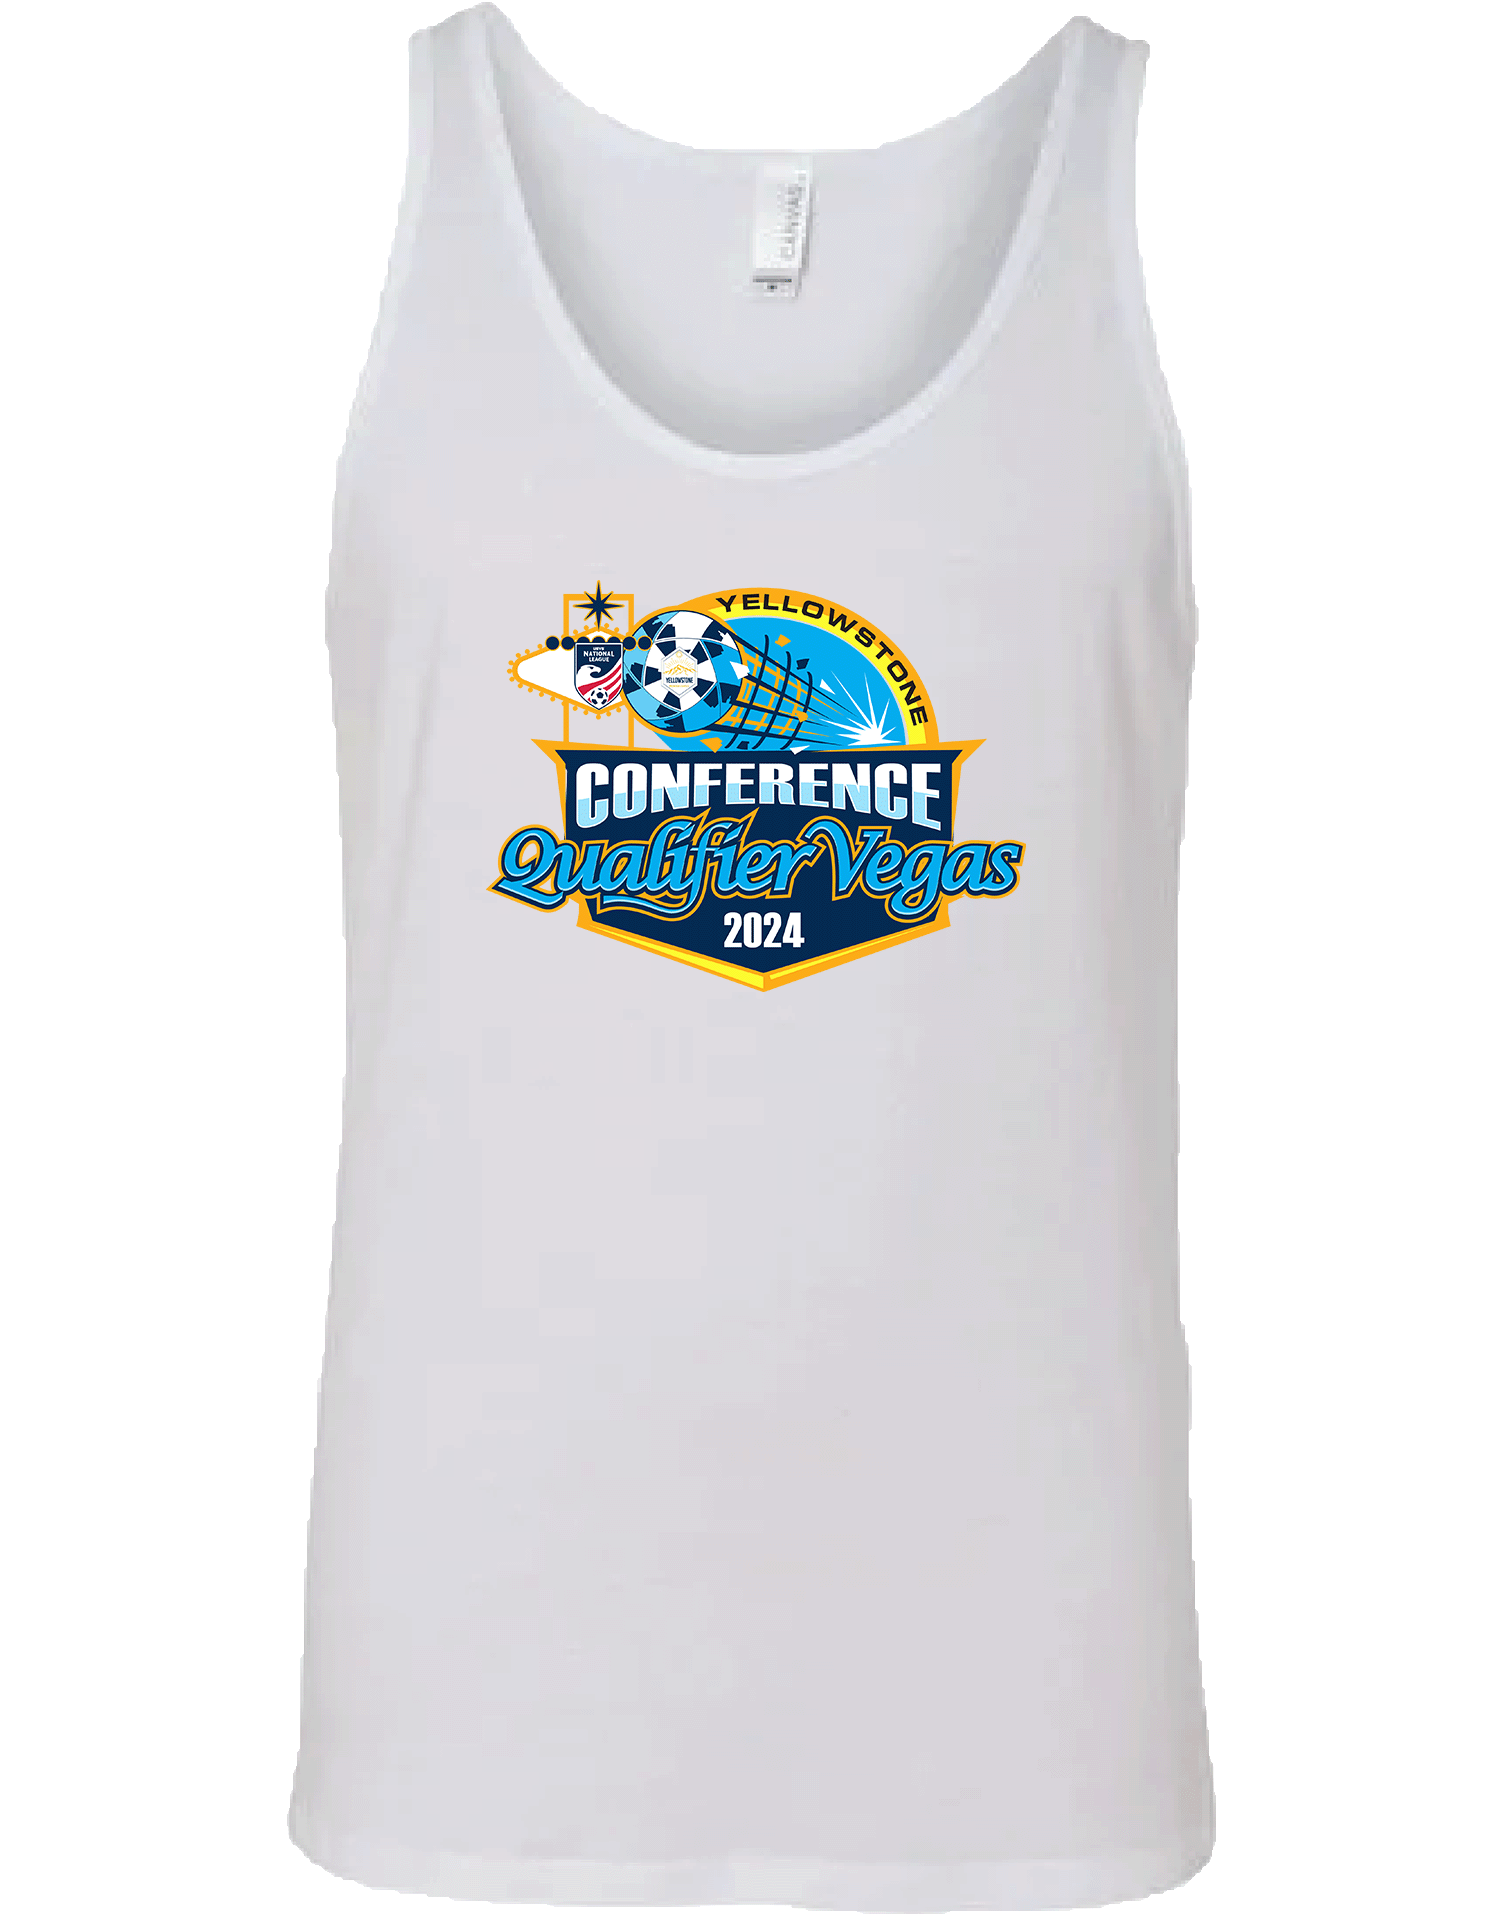 Tank Tops - 2024 Yellowstone Conference Qualifier Vegas